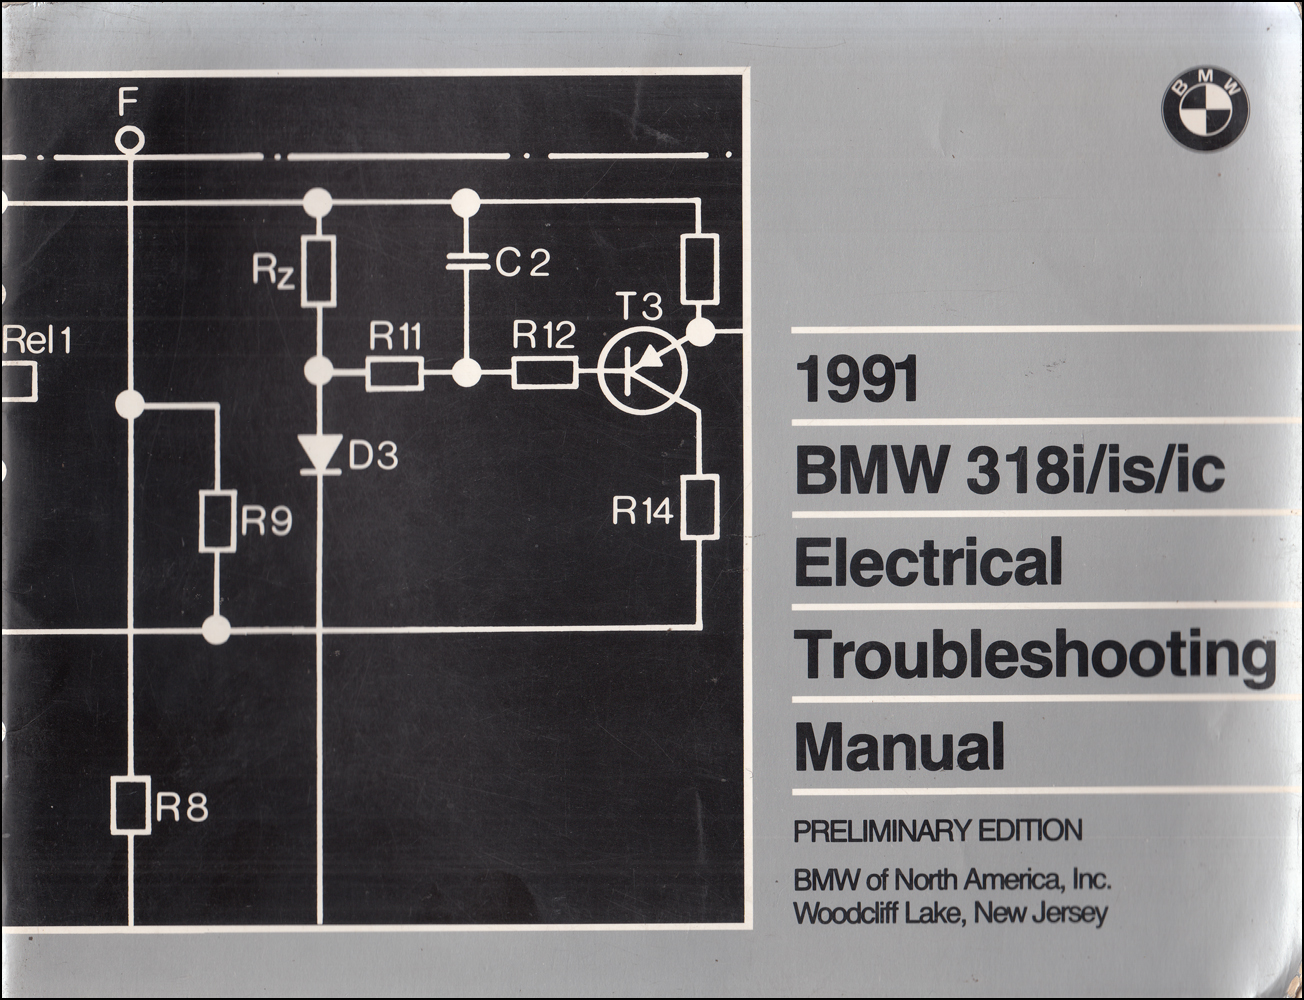 1991 BMW 318i/is/ic Electrical Troubleshooting Manual Preliminary Edition